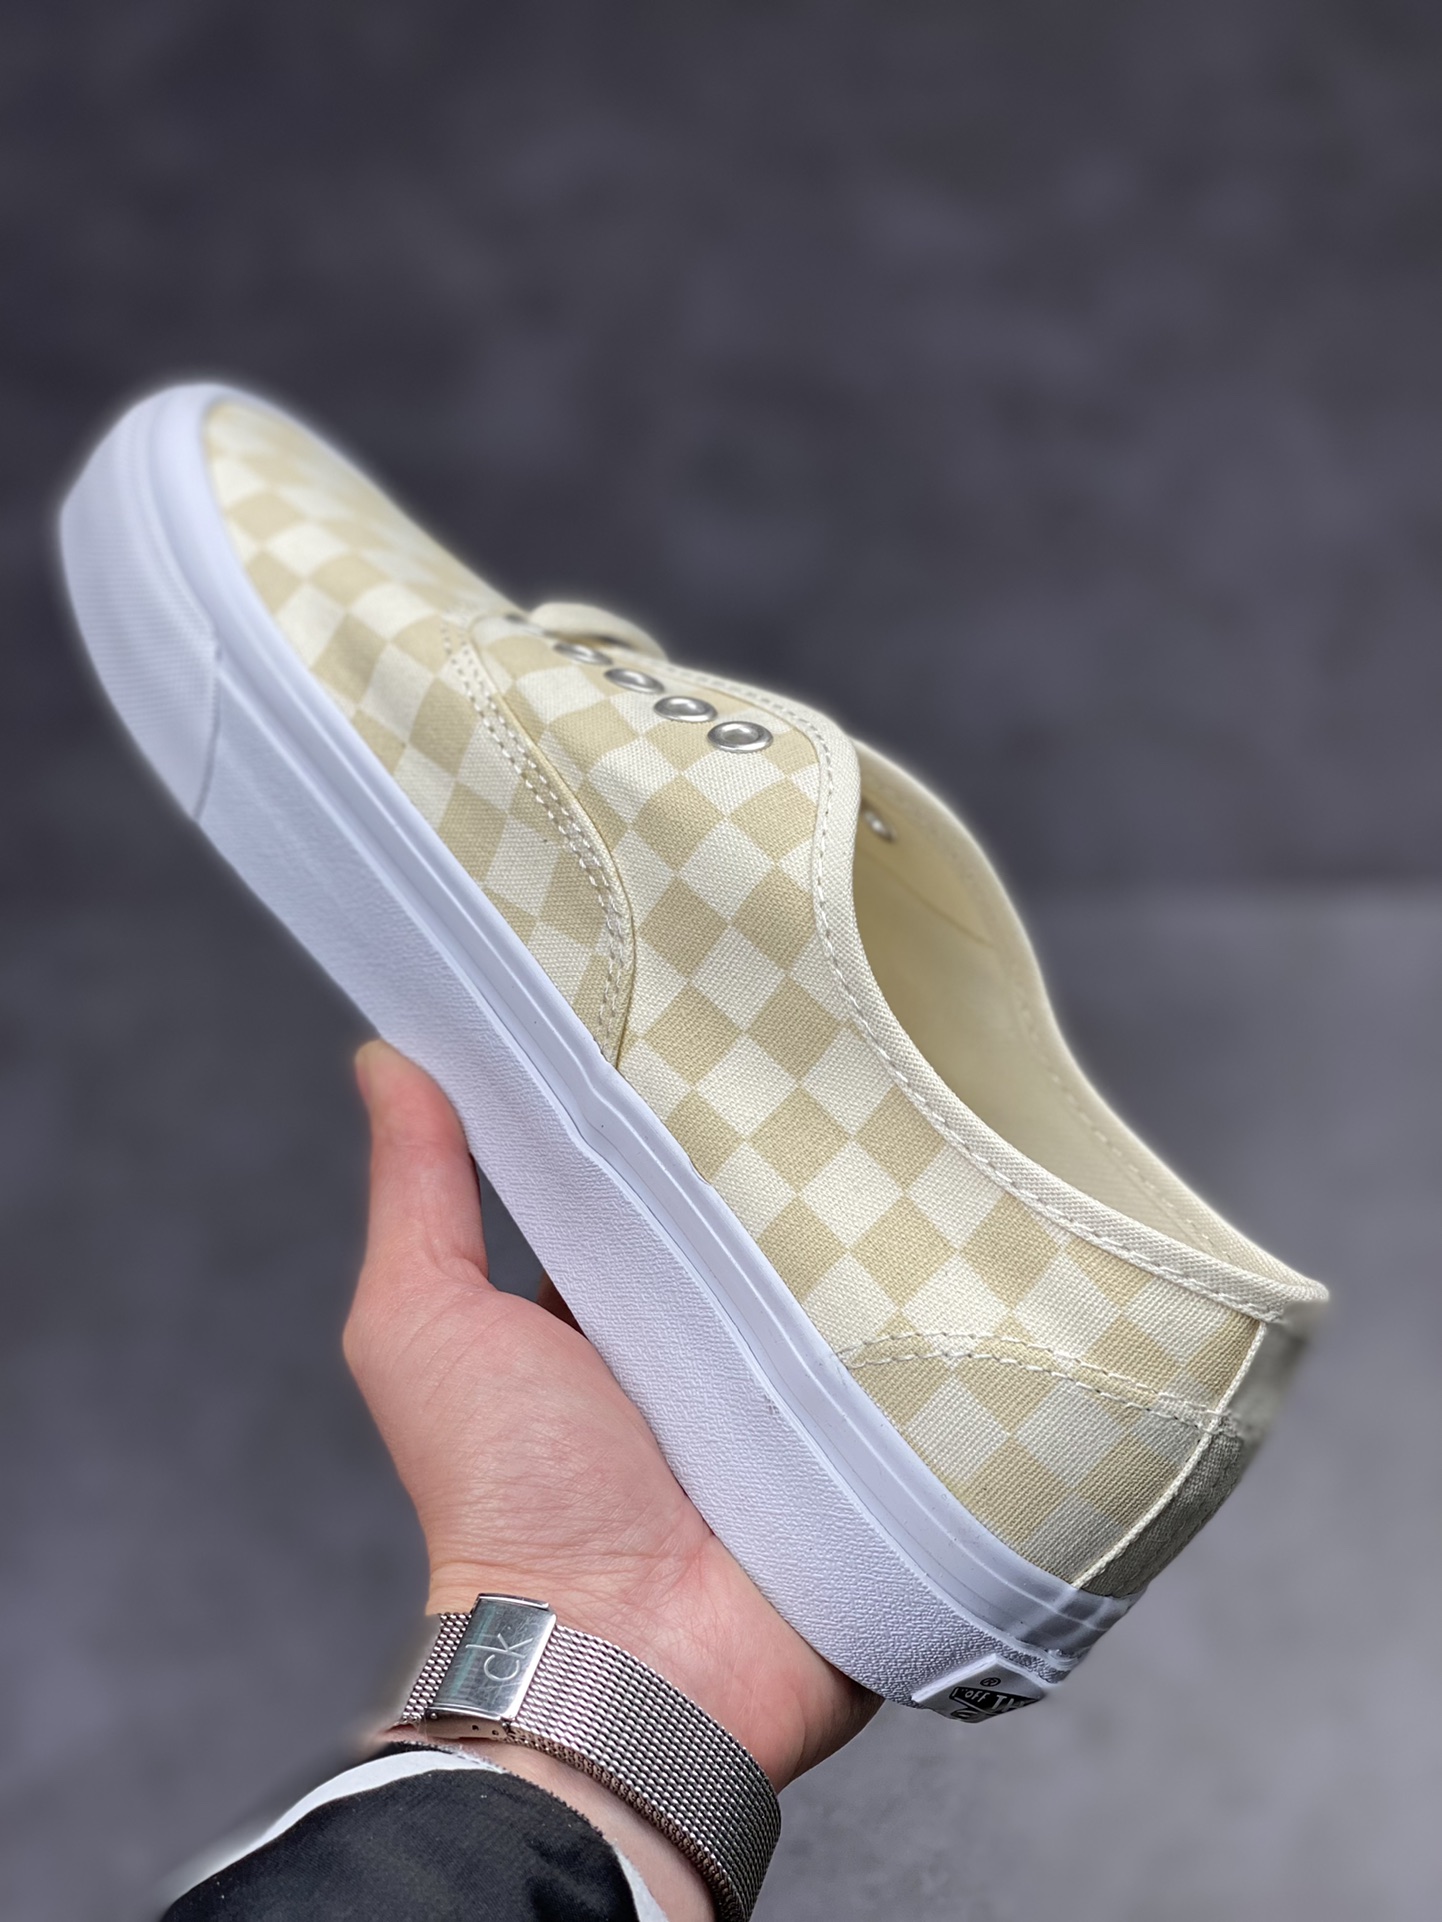 [Renewal Week] Vans official Anaheim VLT high-end line Authentic yellow and white checkerboard canvas shoes